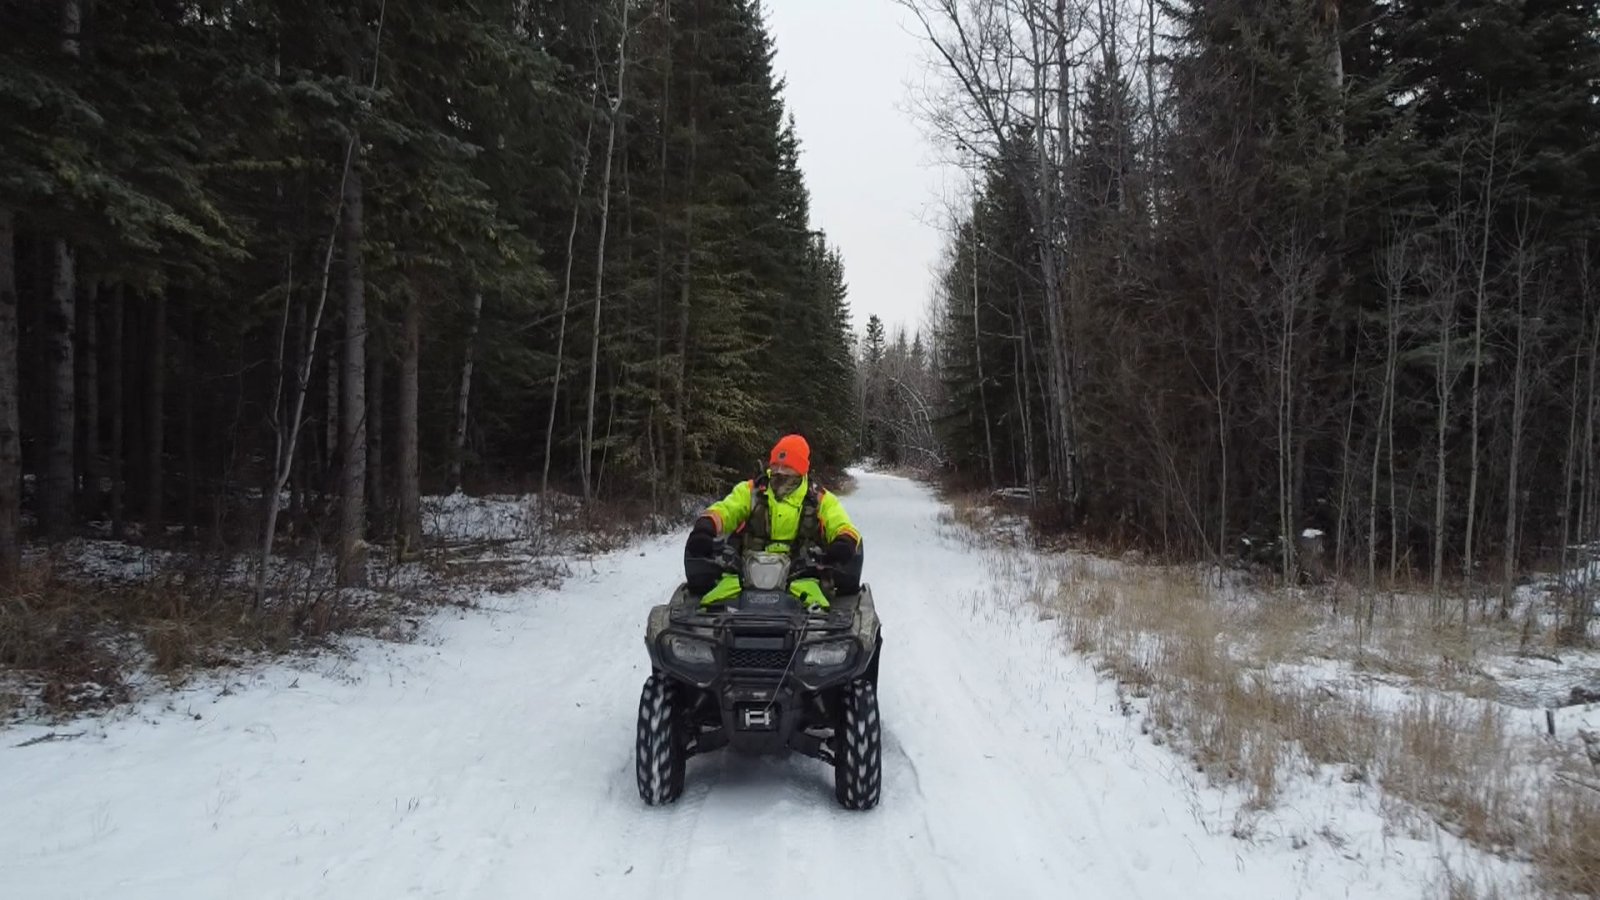 A man rides on an ATV in high vis.